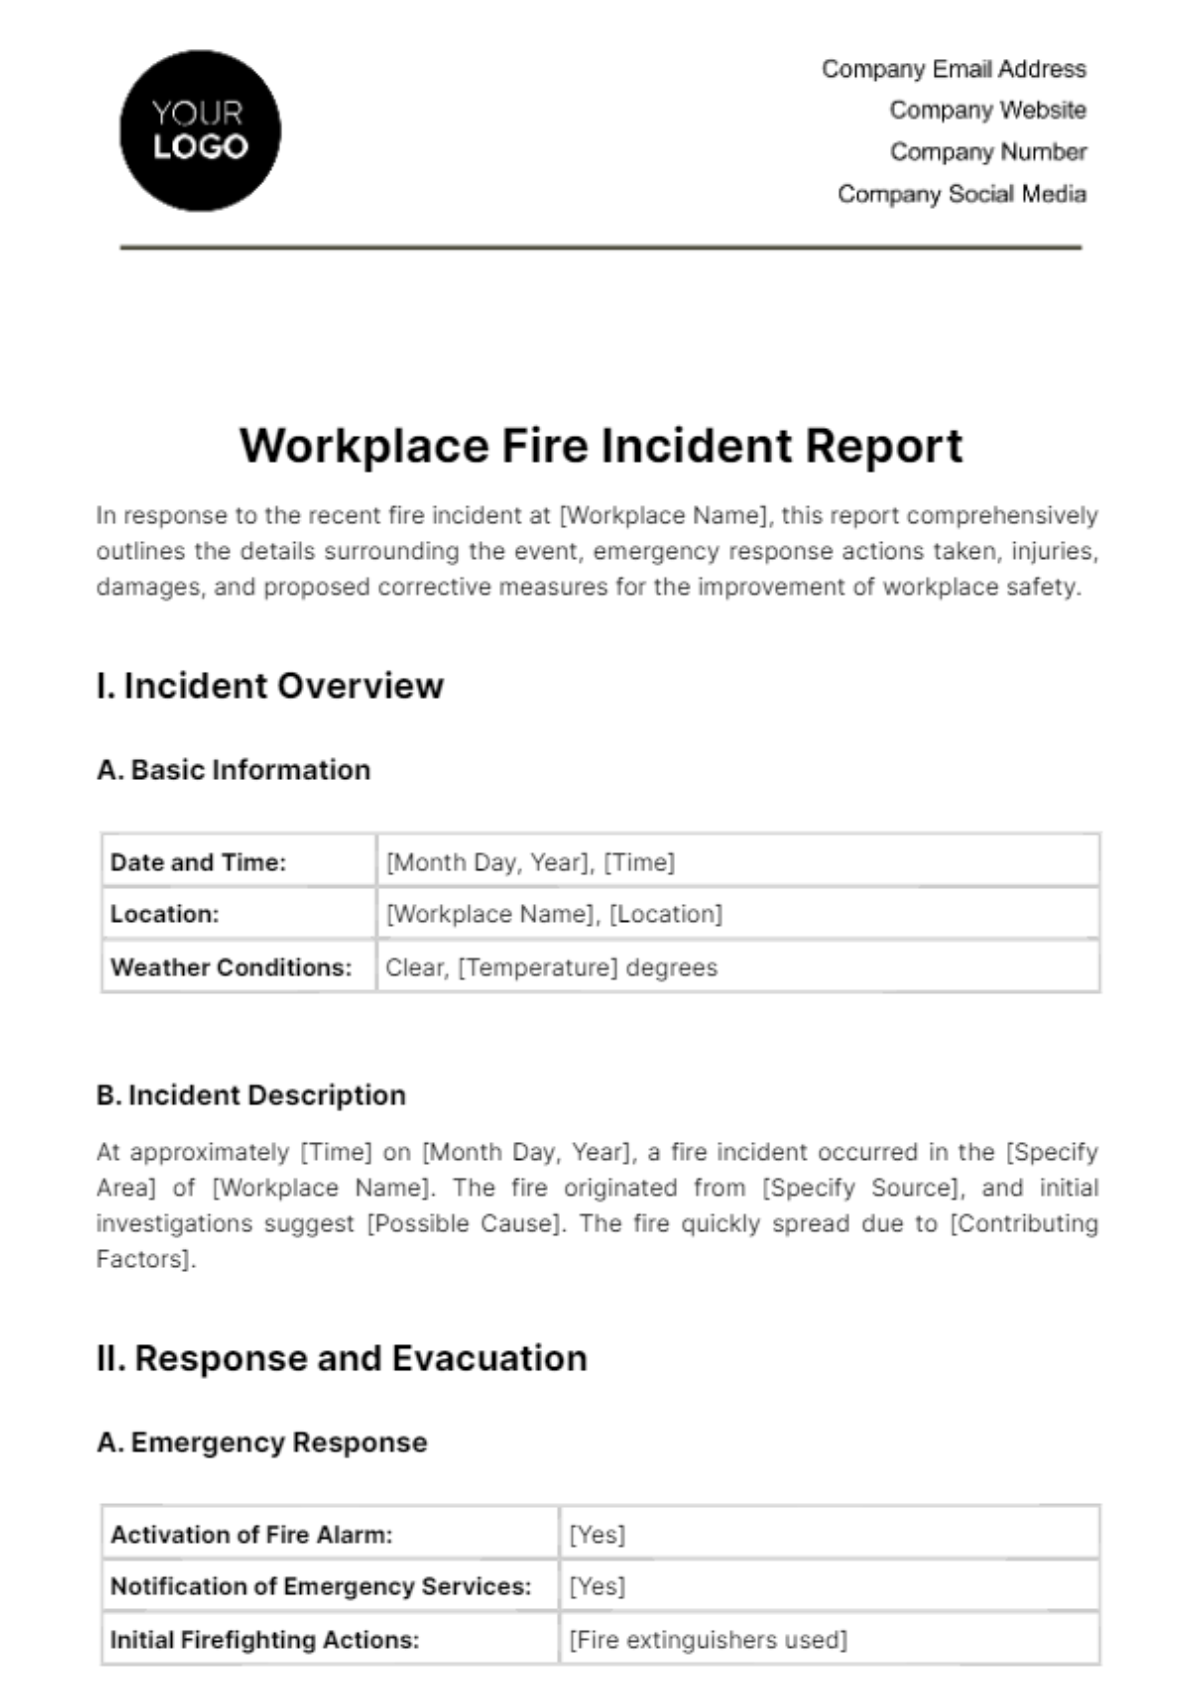 Workplace Fire Incident Report Template